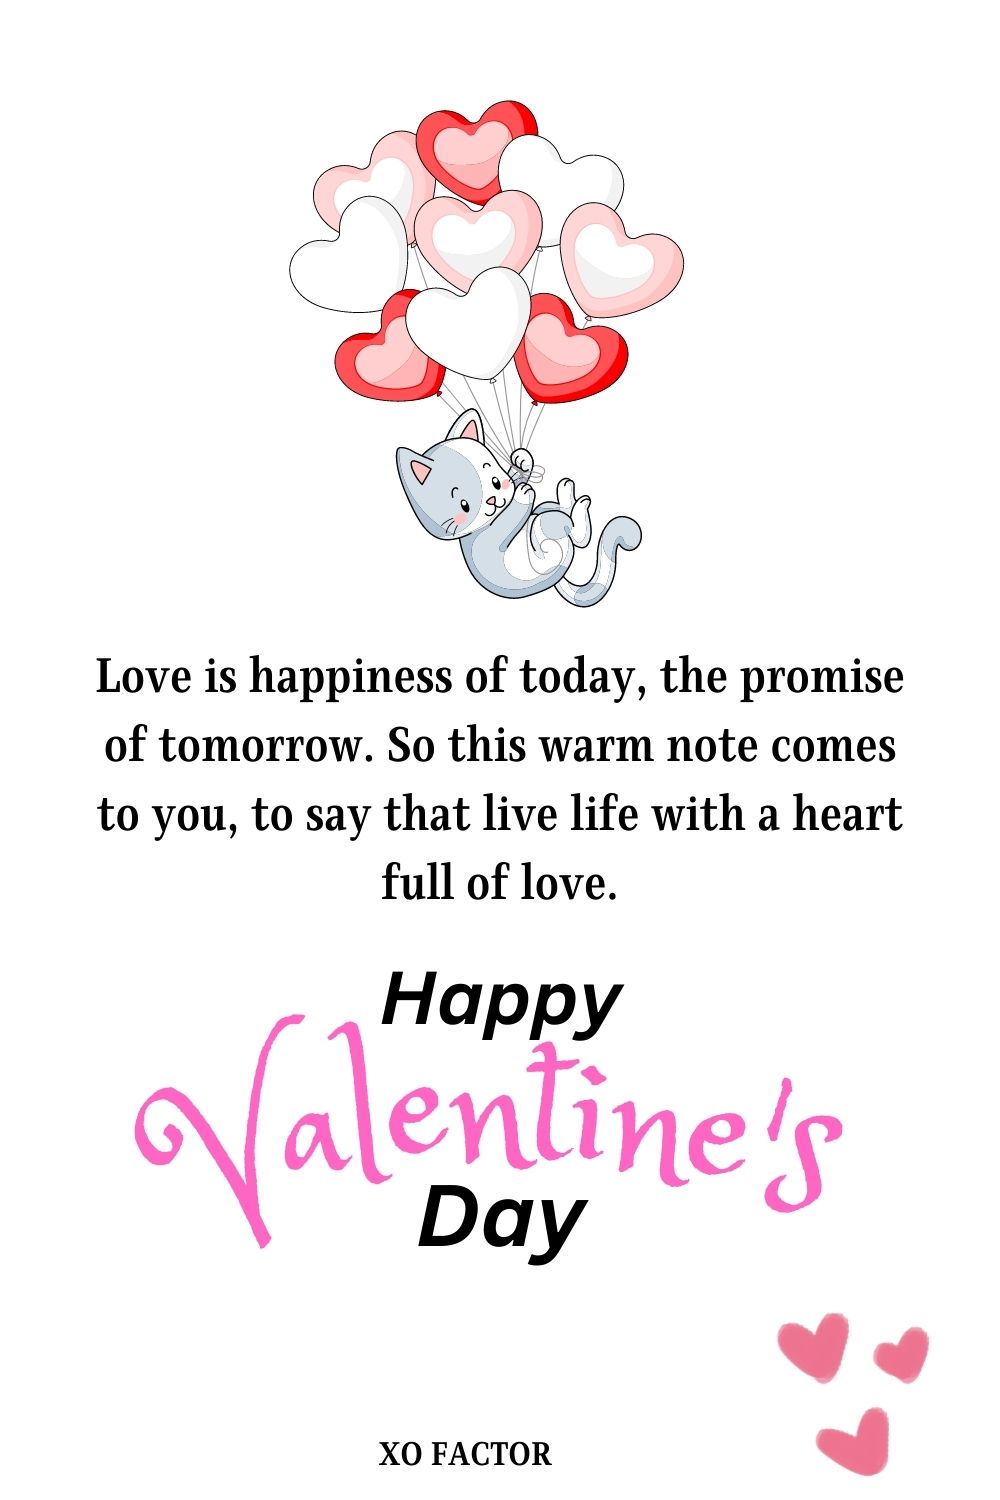 Love is happiness of today, the promise of tomorrow. So this warm note comes to you, to say that live life with a heart full of love. Happy Valentine’s Day Dear!